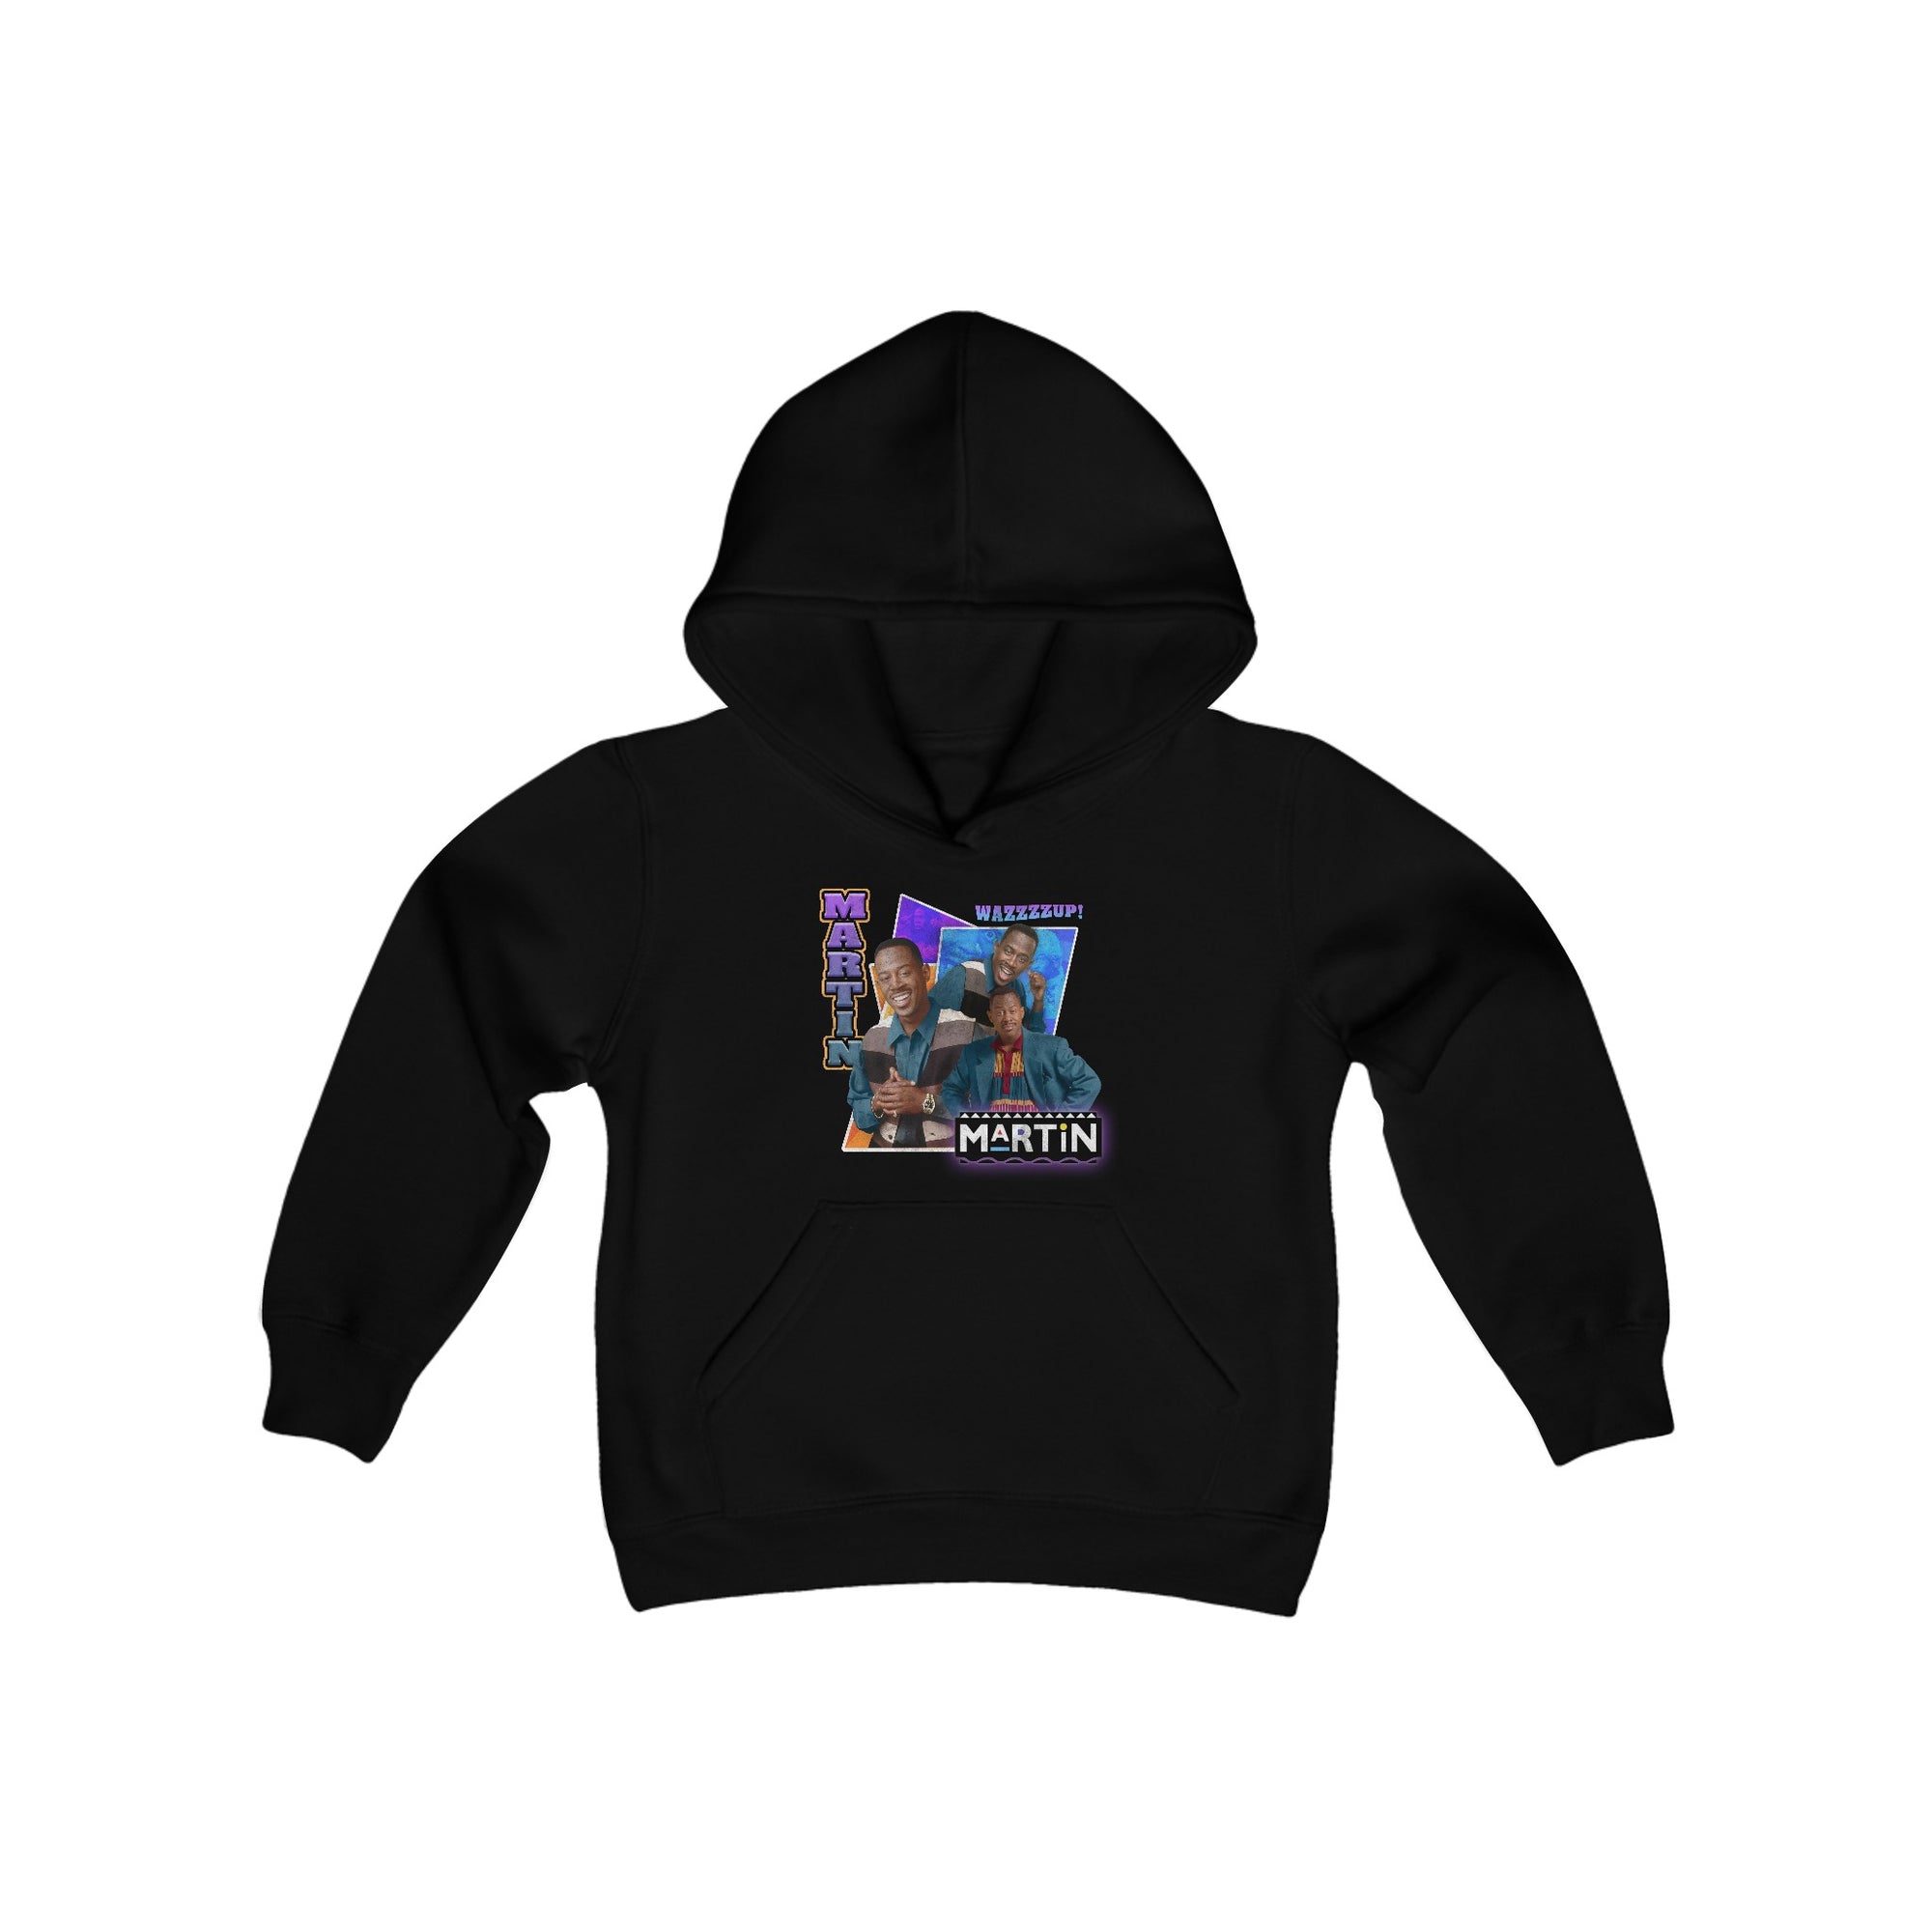 WAZZZZUP! Youth Hoodie